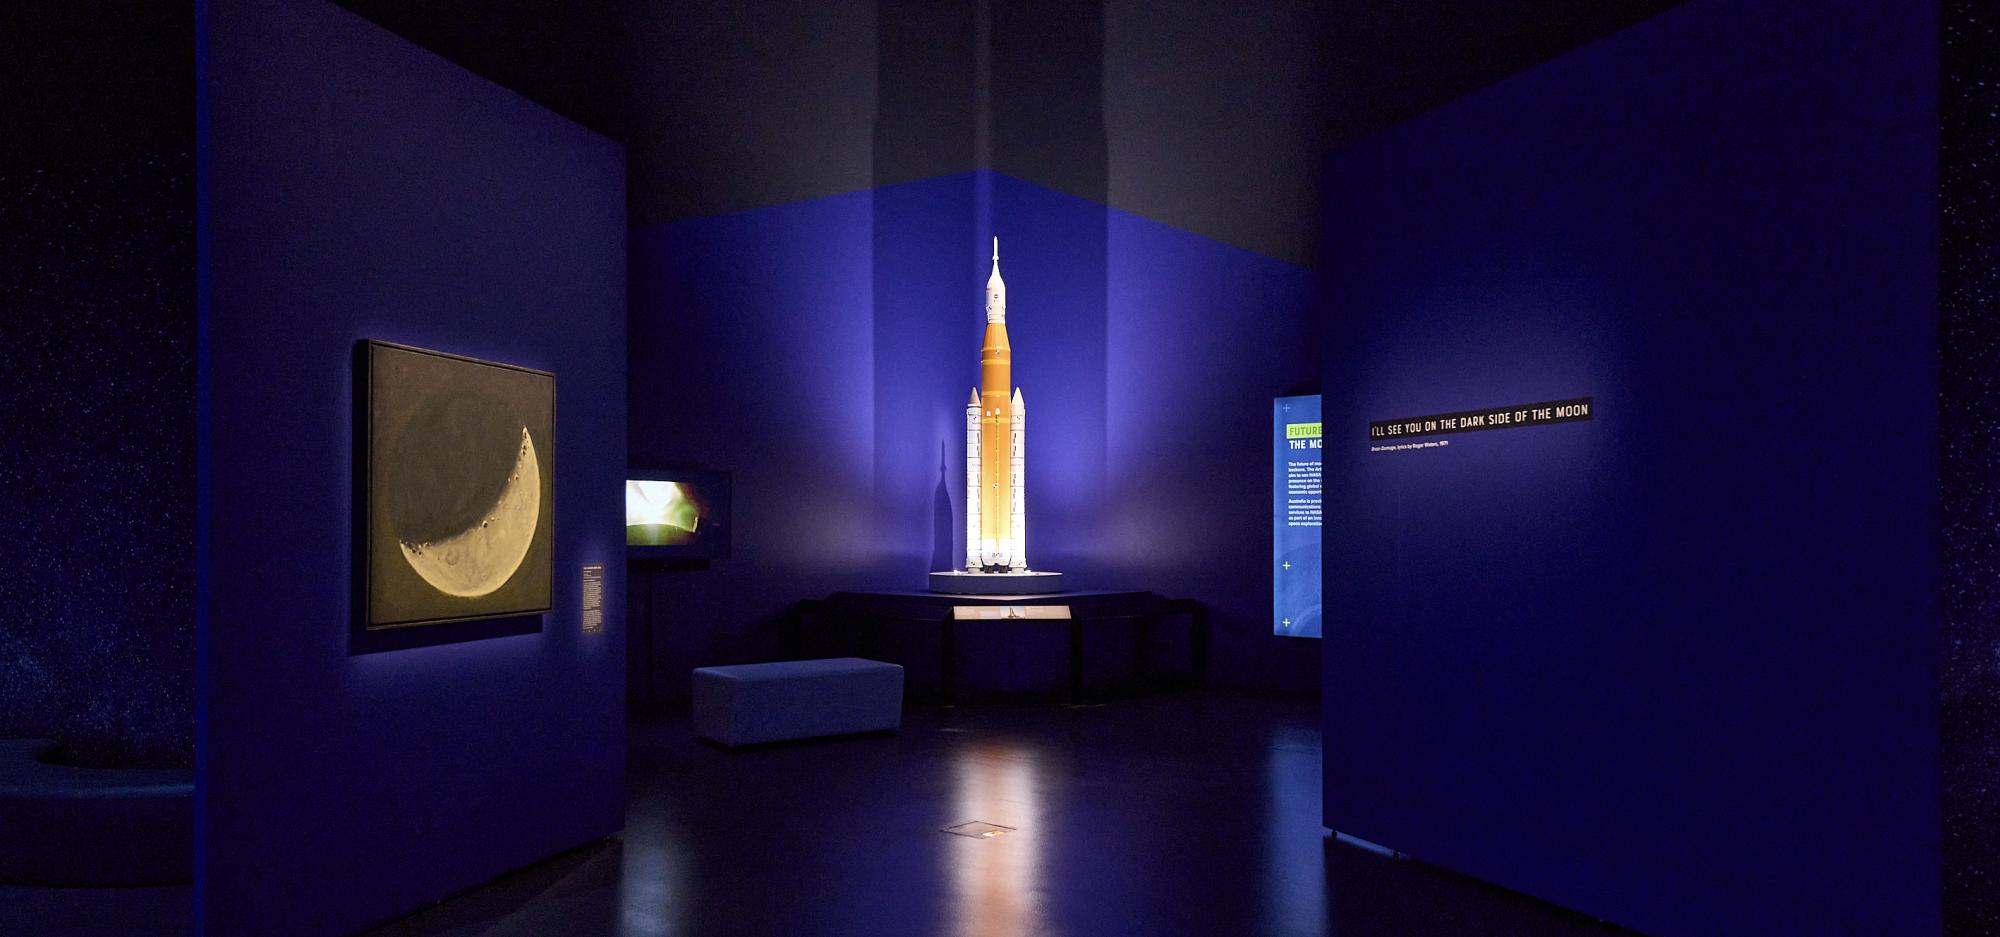 The walls of a dramatically lit Museum gallery bathed in blue light open to reveal a brightly lit rocket replica on a small plinth.